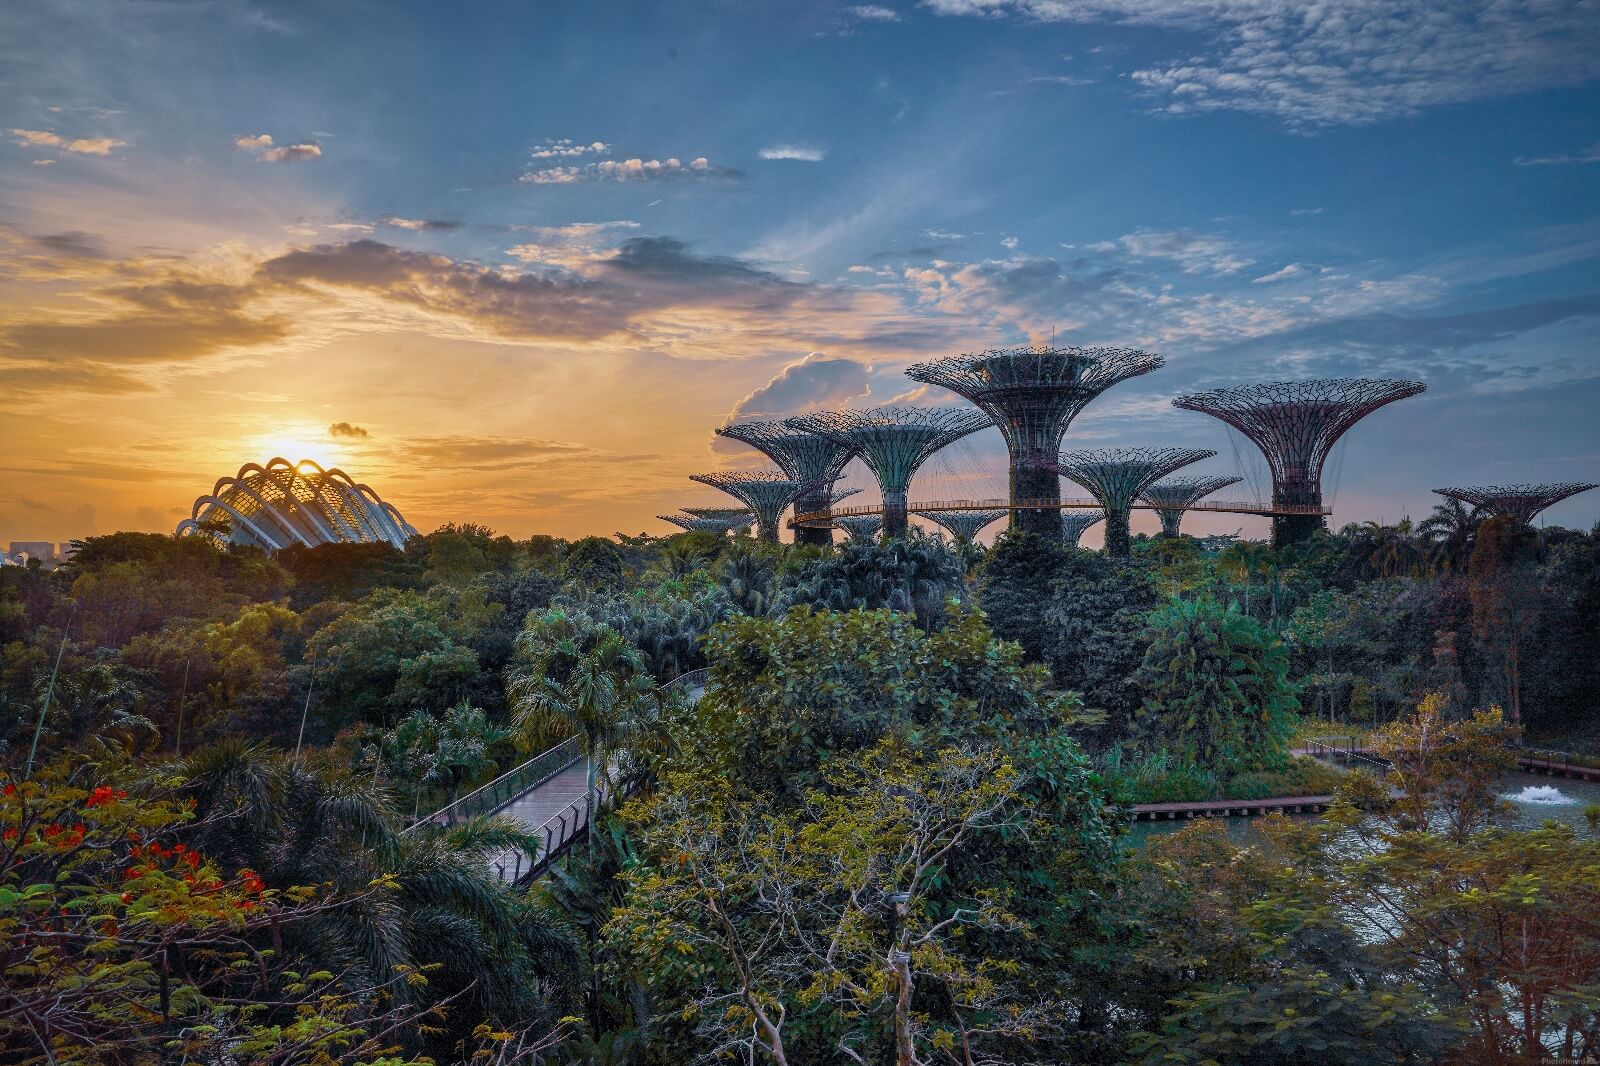 Image of Gardens by the Bay by Oliver Sherratt